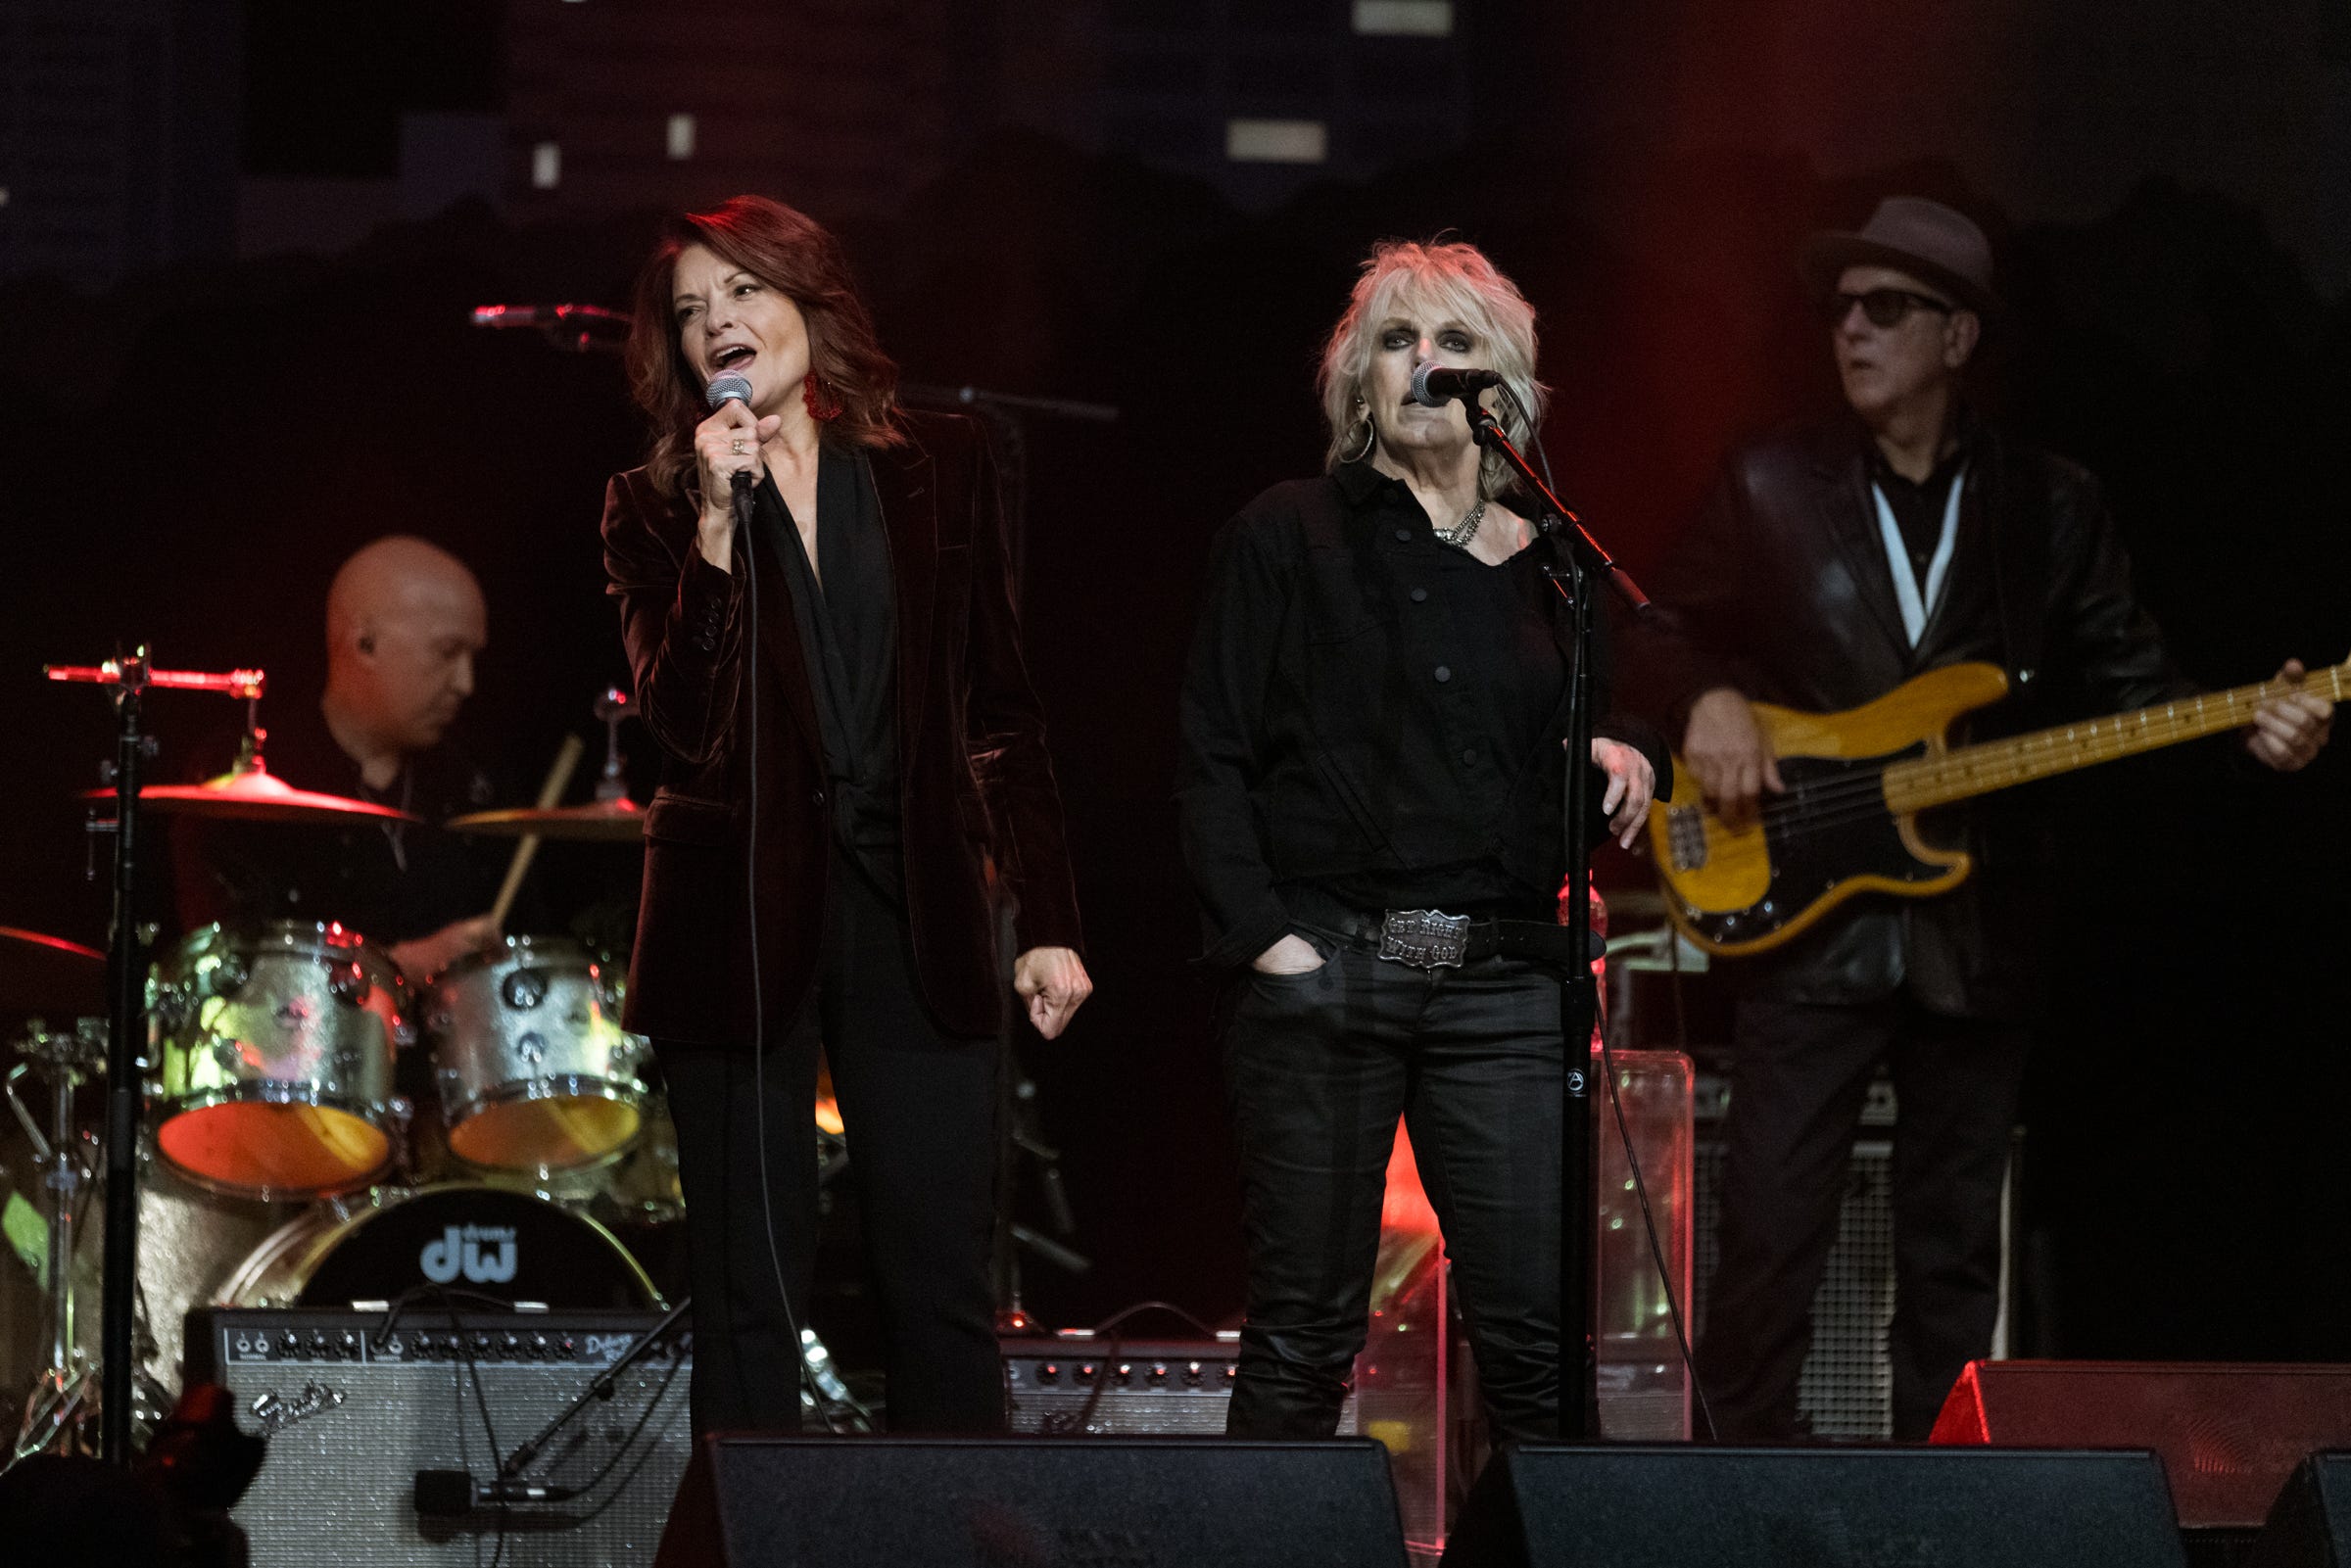 Lucinda Williams performs with guest Rosanne Cash at the 2021 Austin City Limits Hall of Fame Induction & Celebration at the Moody Theater on Thursday October 28, 2021 (Robert Hein for American-Statesman)